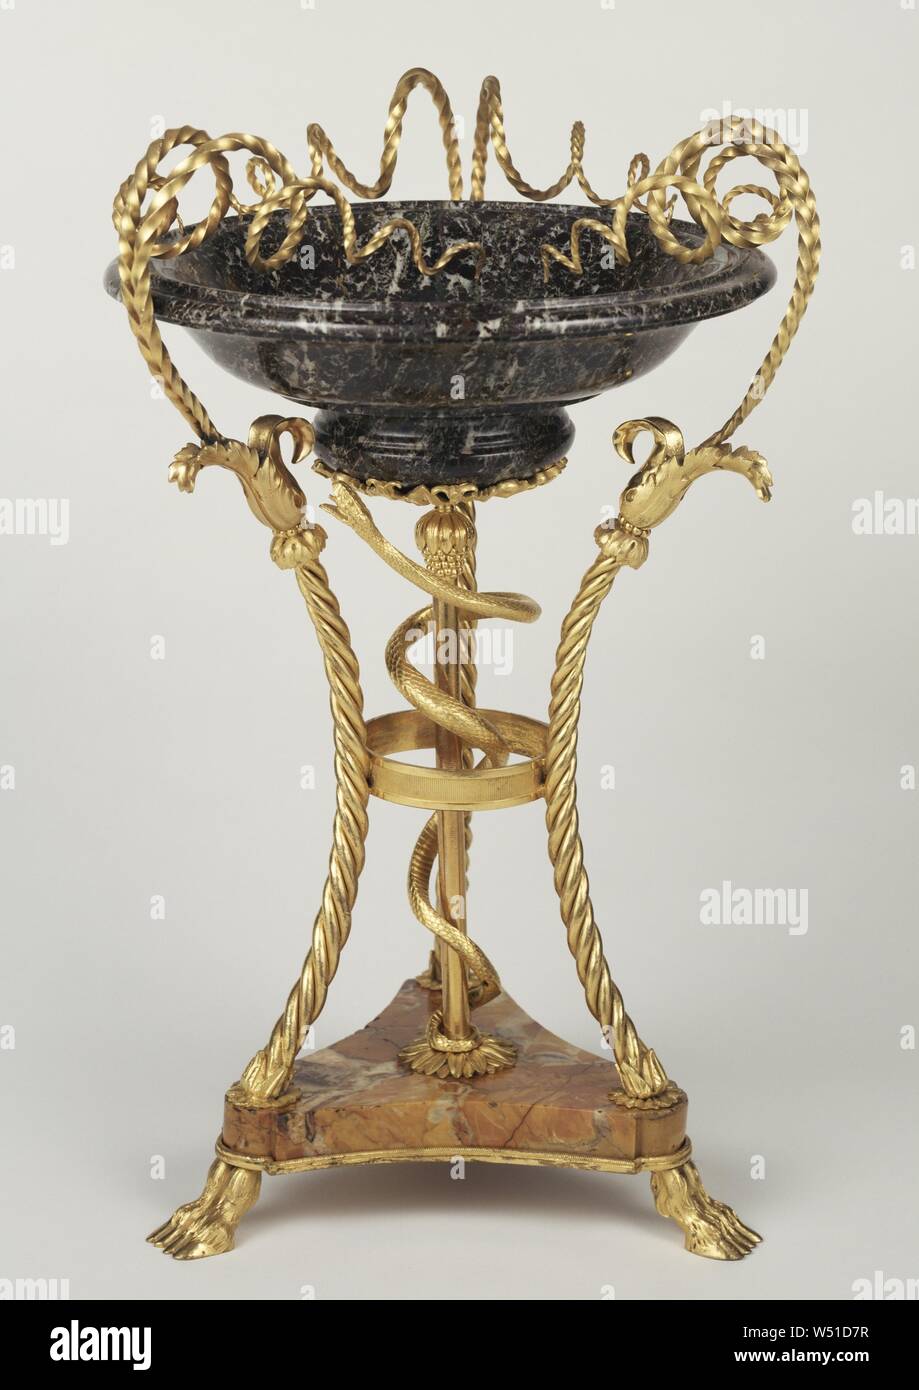 Standing Tazza, Unknown, Paris, France, about 1785, Jaune fonce marble and breche violette (?), gilt bronze mounts, 37.8 × 24.4 × 25.2 cm (14 7/8 × 9 5/8 × 9 15/16 in Stock Photo